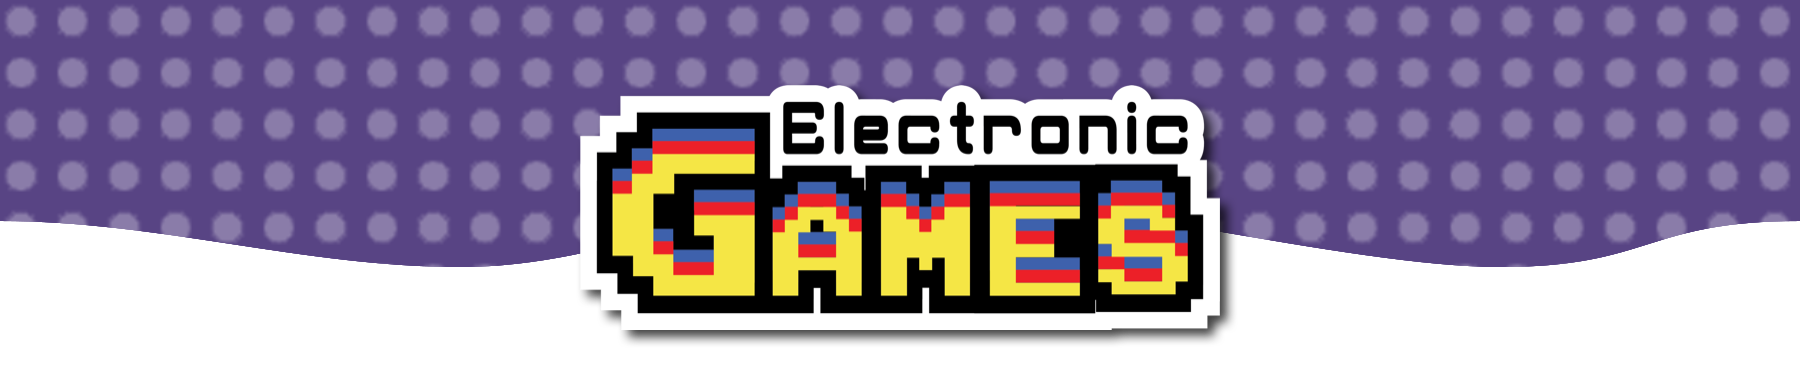 Electronic Games